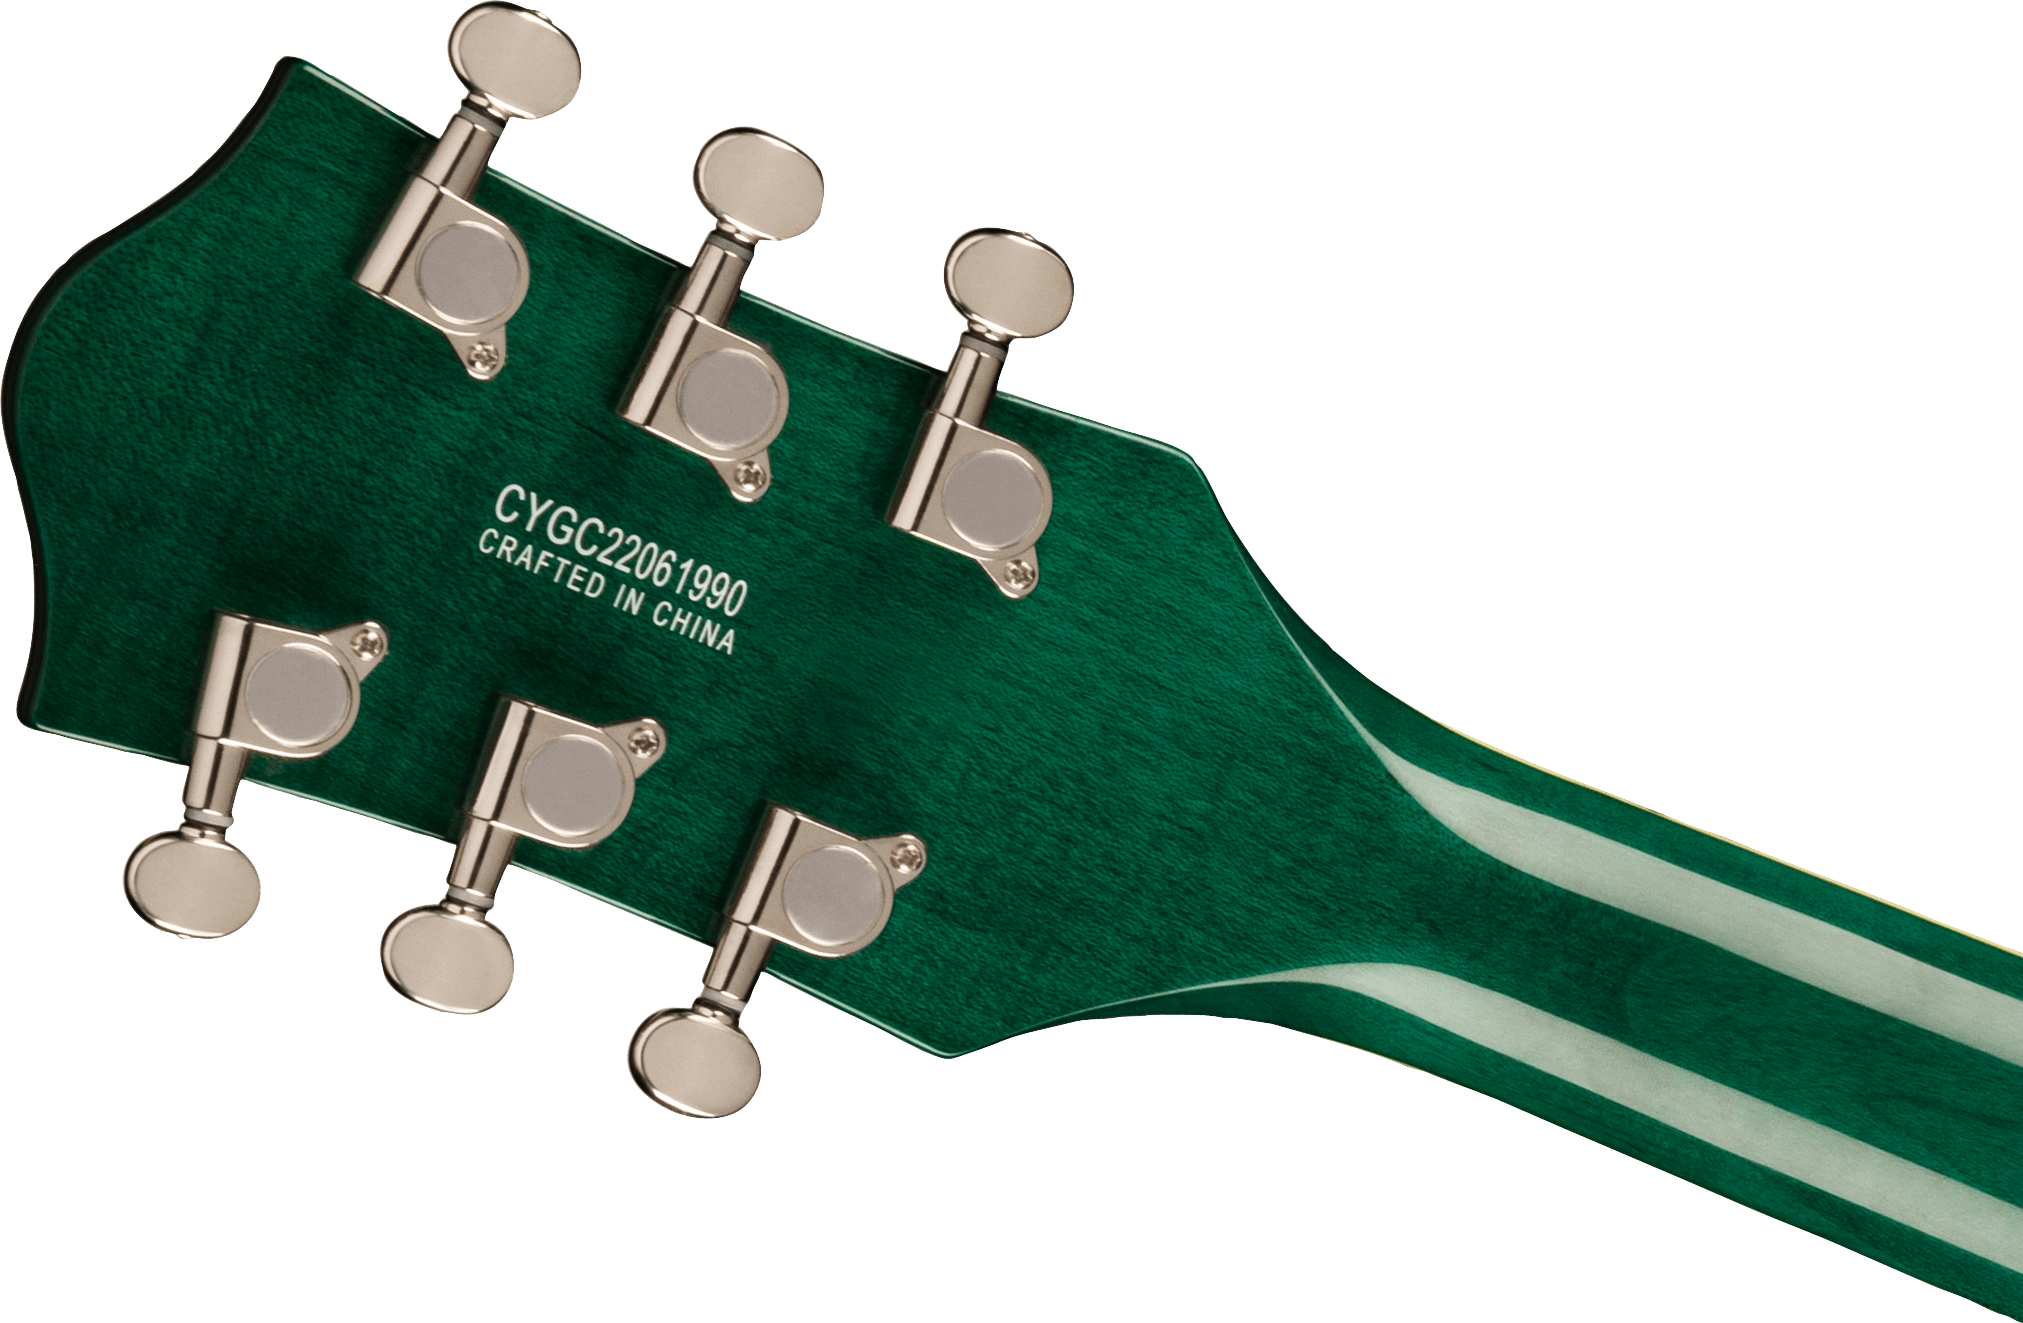 Gretsch G5655T-QM Electromatic® Center Block Jr. Single-Cut Quilted Maple with Bigsby®, Mariana